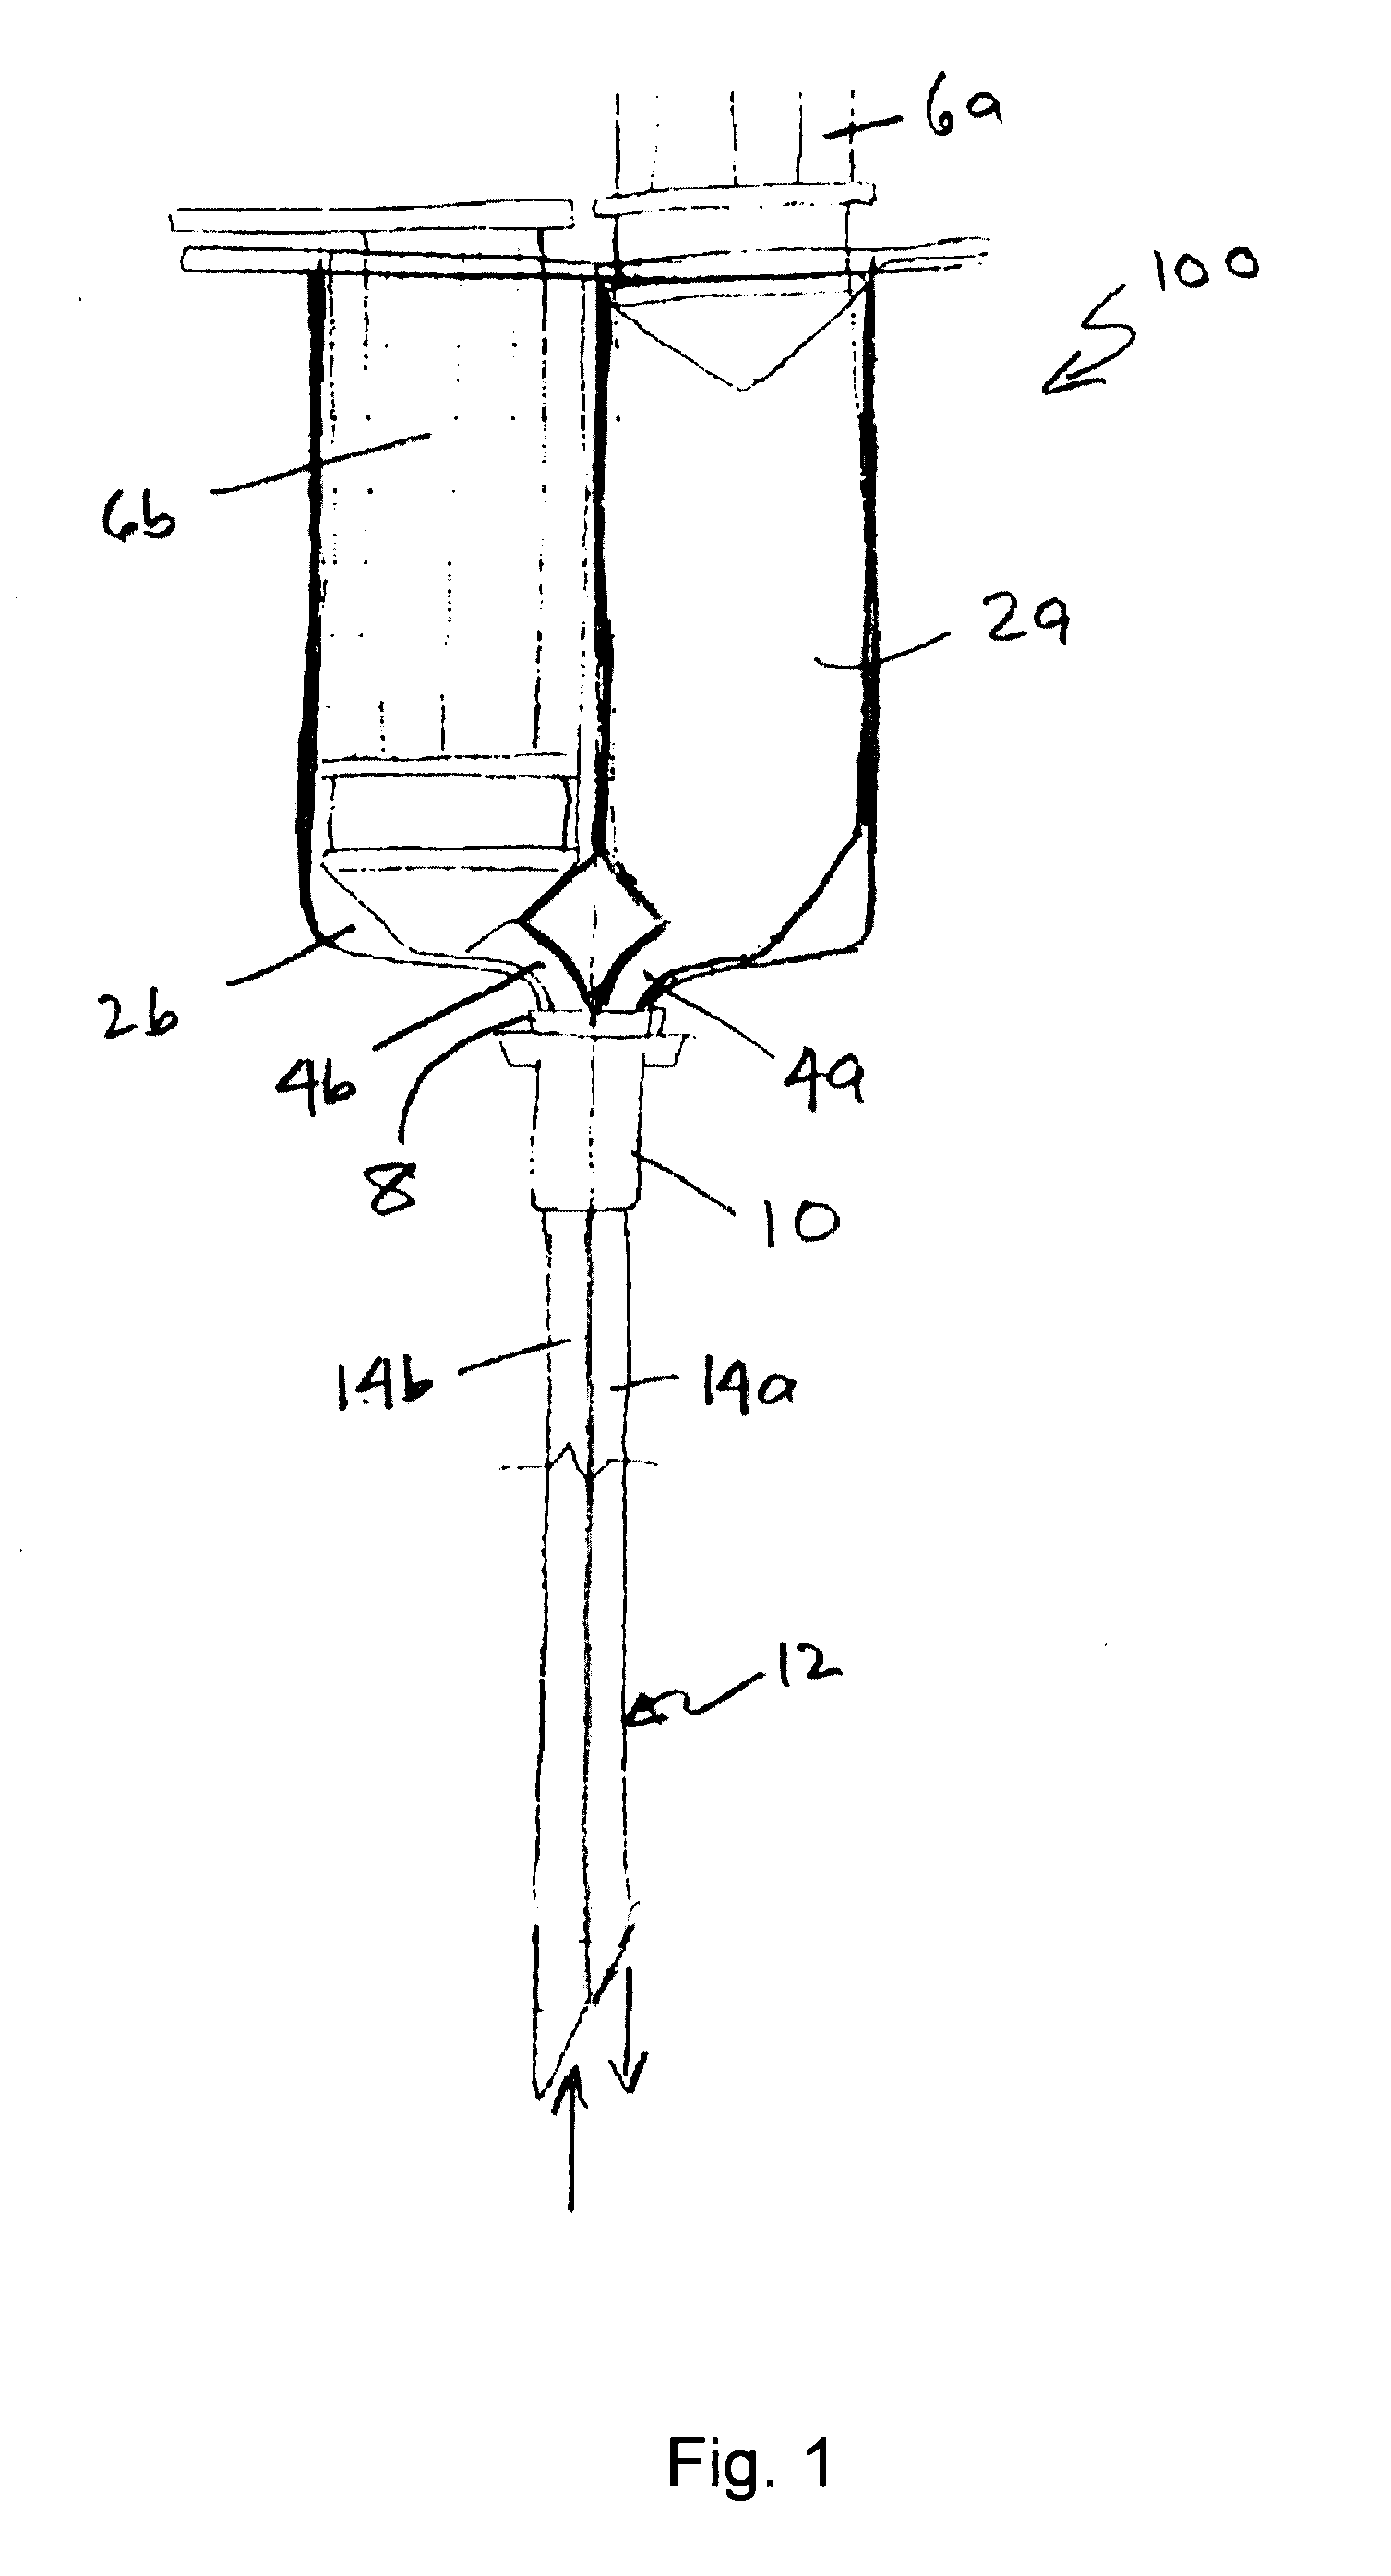 Microparticle delivery syringe and needle for placing particle suspensions and removing vehicle fluid